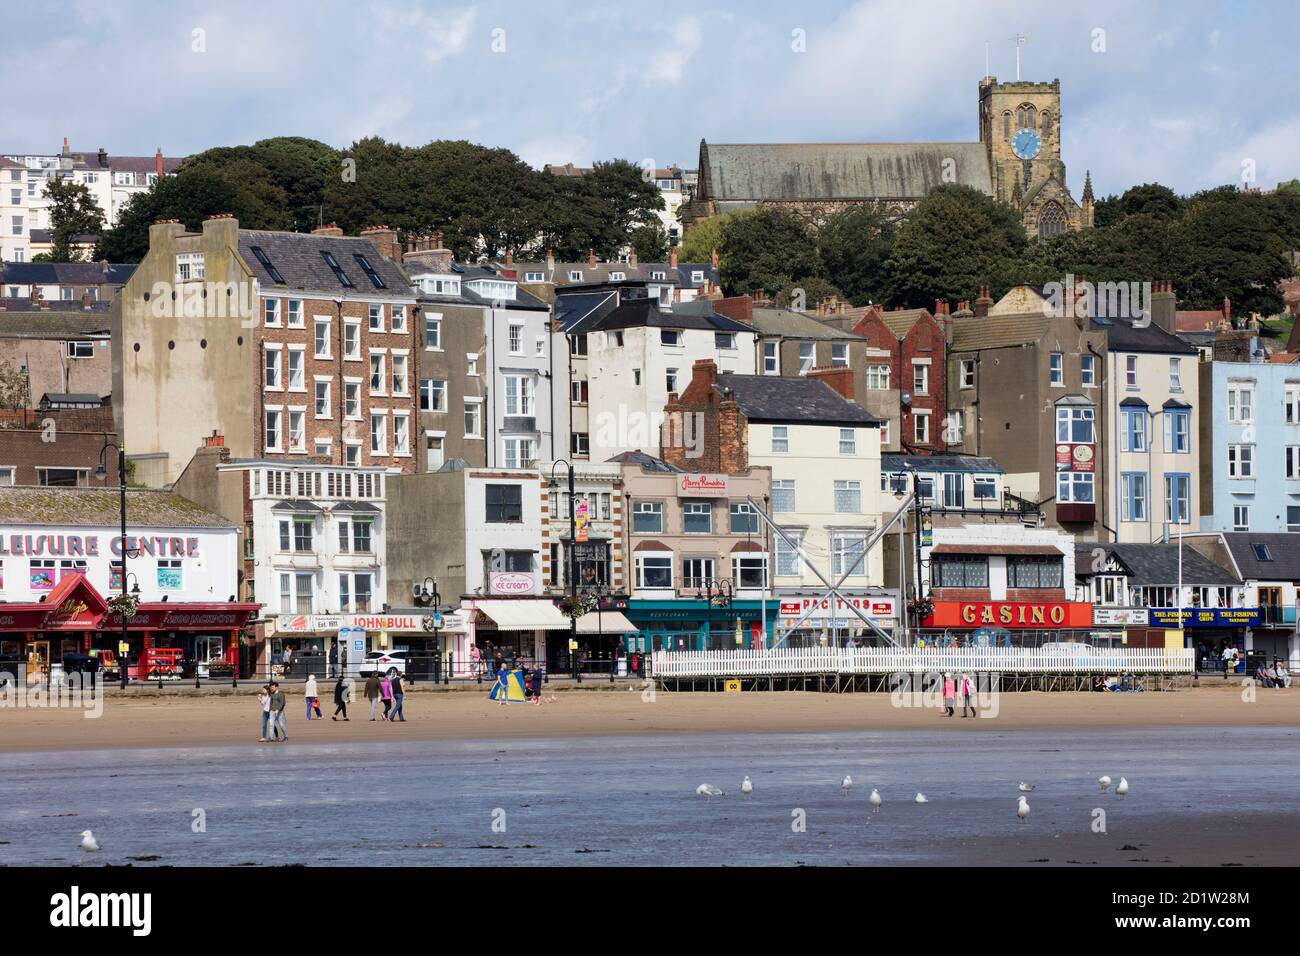 General view looking north-west from the beach towards shops, cafes and amusement arcades at the north end of the street, with St Mary's Church in the background, Scarborough, North Yorkshire, UK. Stock Photo